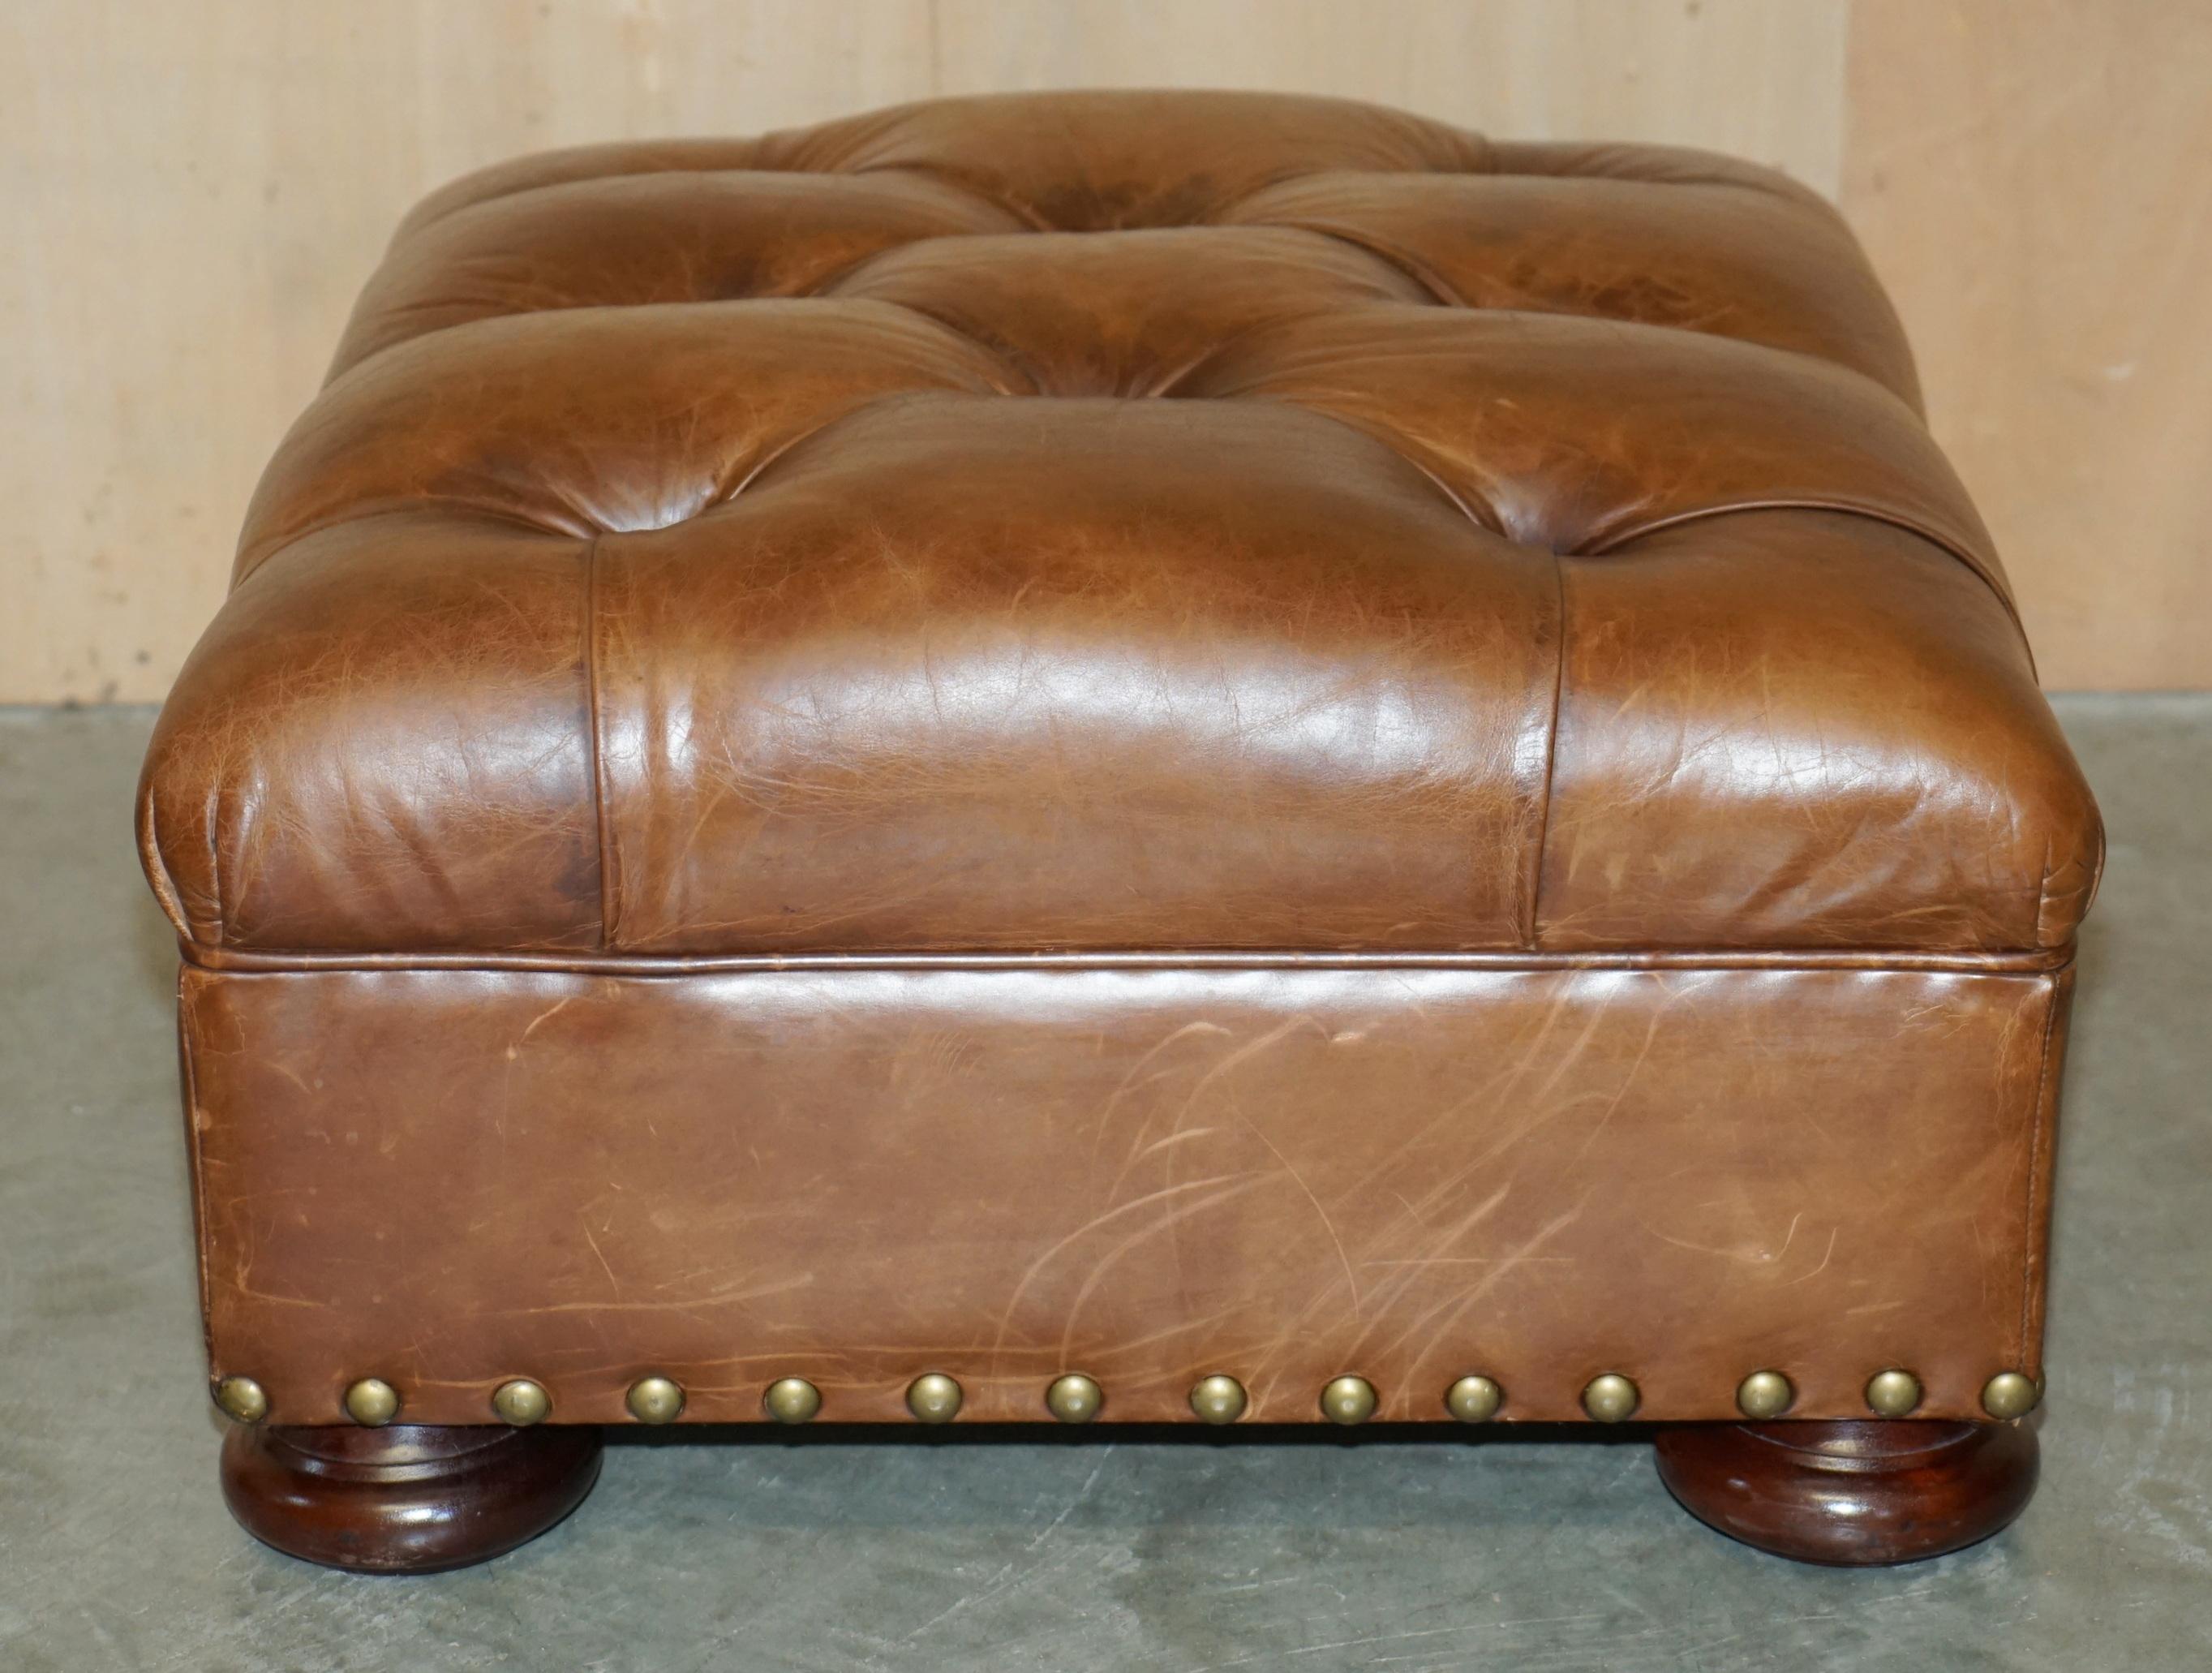 RALPH LAUREN WRITER'S CHESTERFIELD FOOTSTOOL OTTOMAN IN HERiTAGE BROWN LEATHER 10